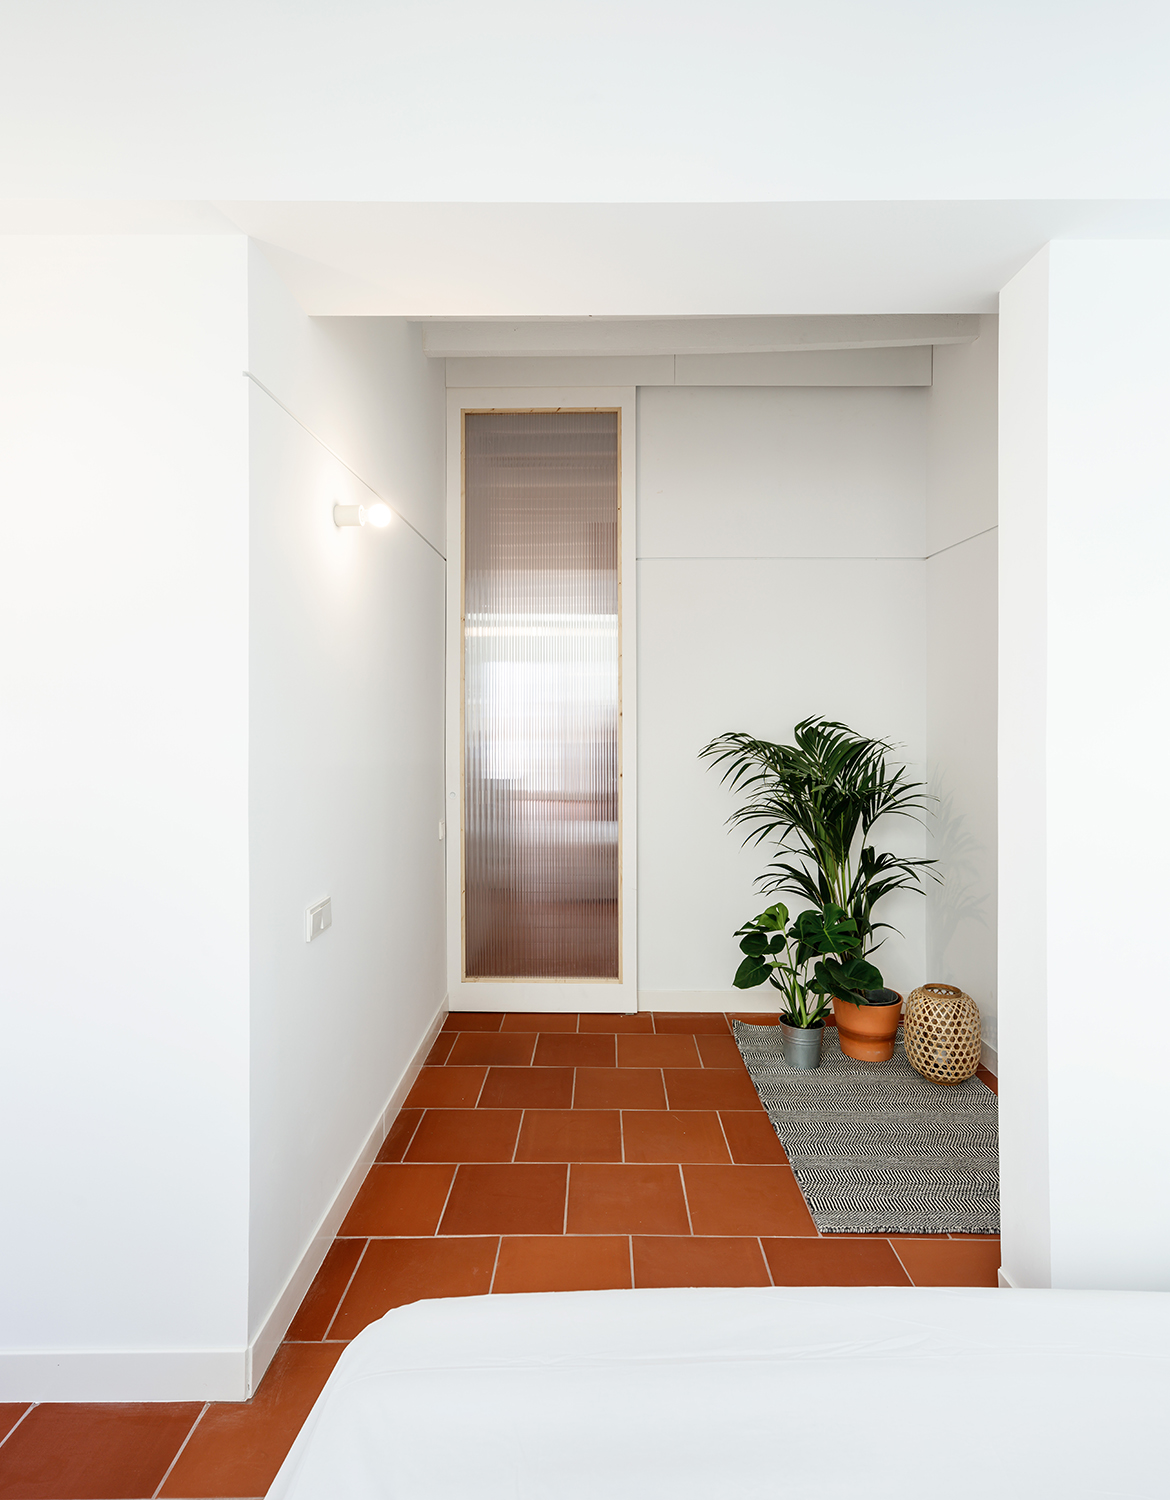 CRU innovative flat renovation project in Barcelona. La Odette, an old apartment converted into a modern and spacious piece.